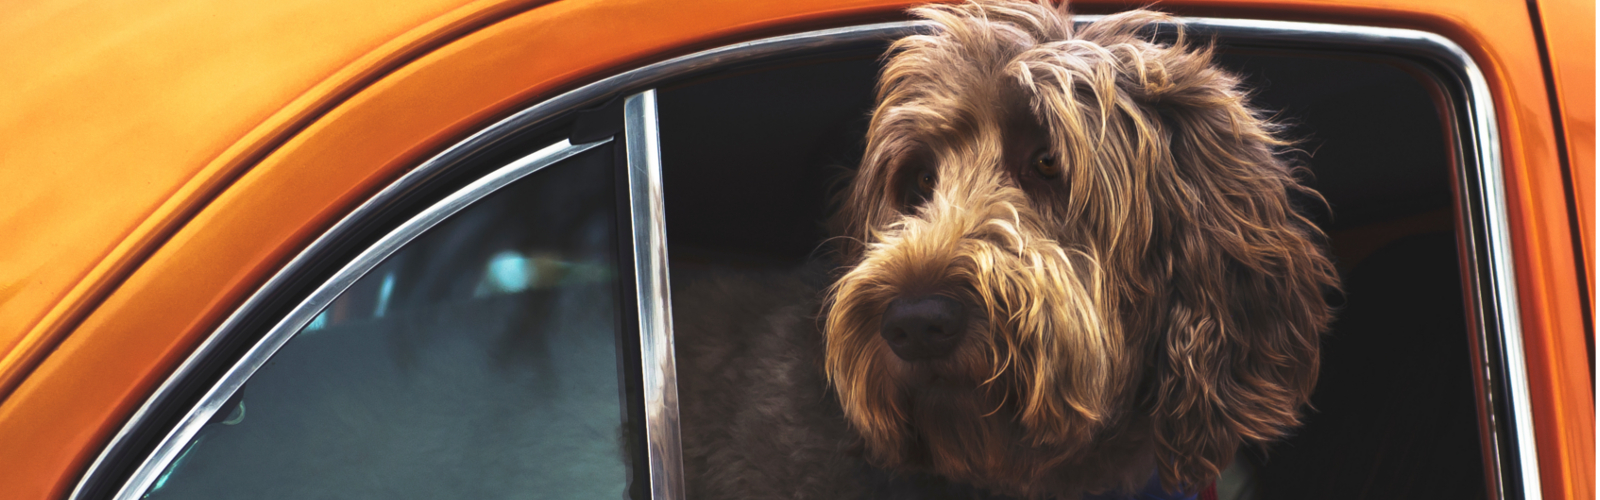 Dog in orange car with head out window